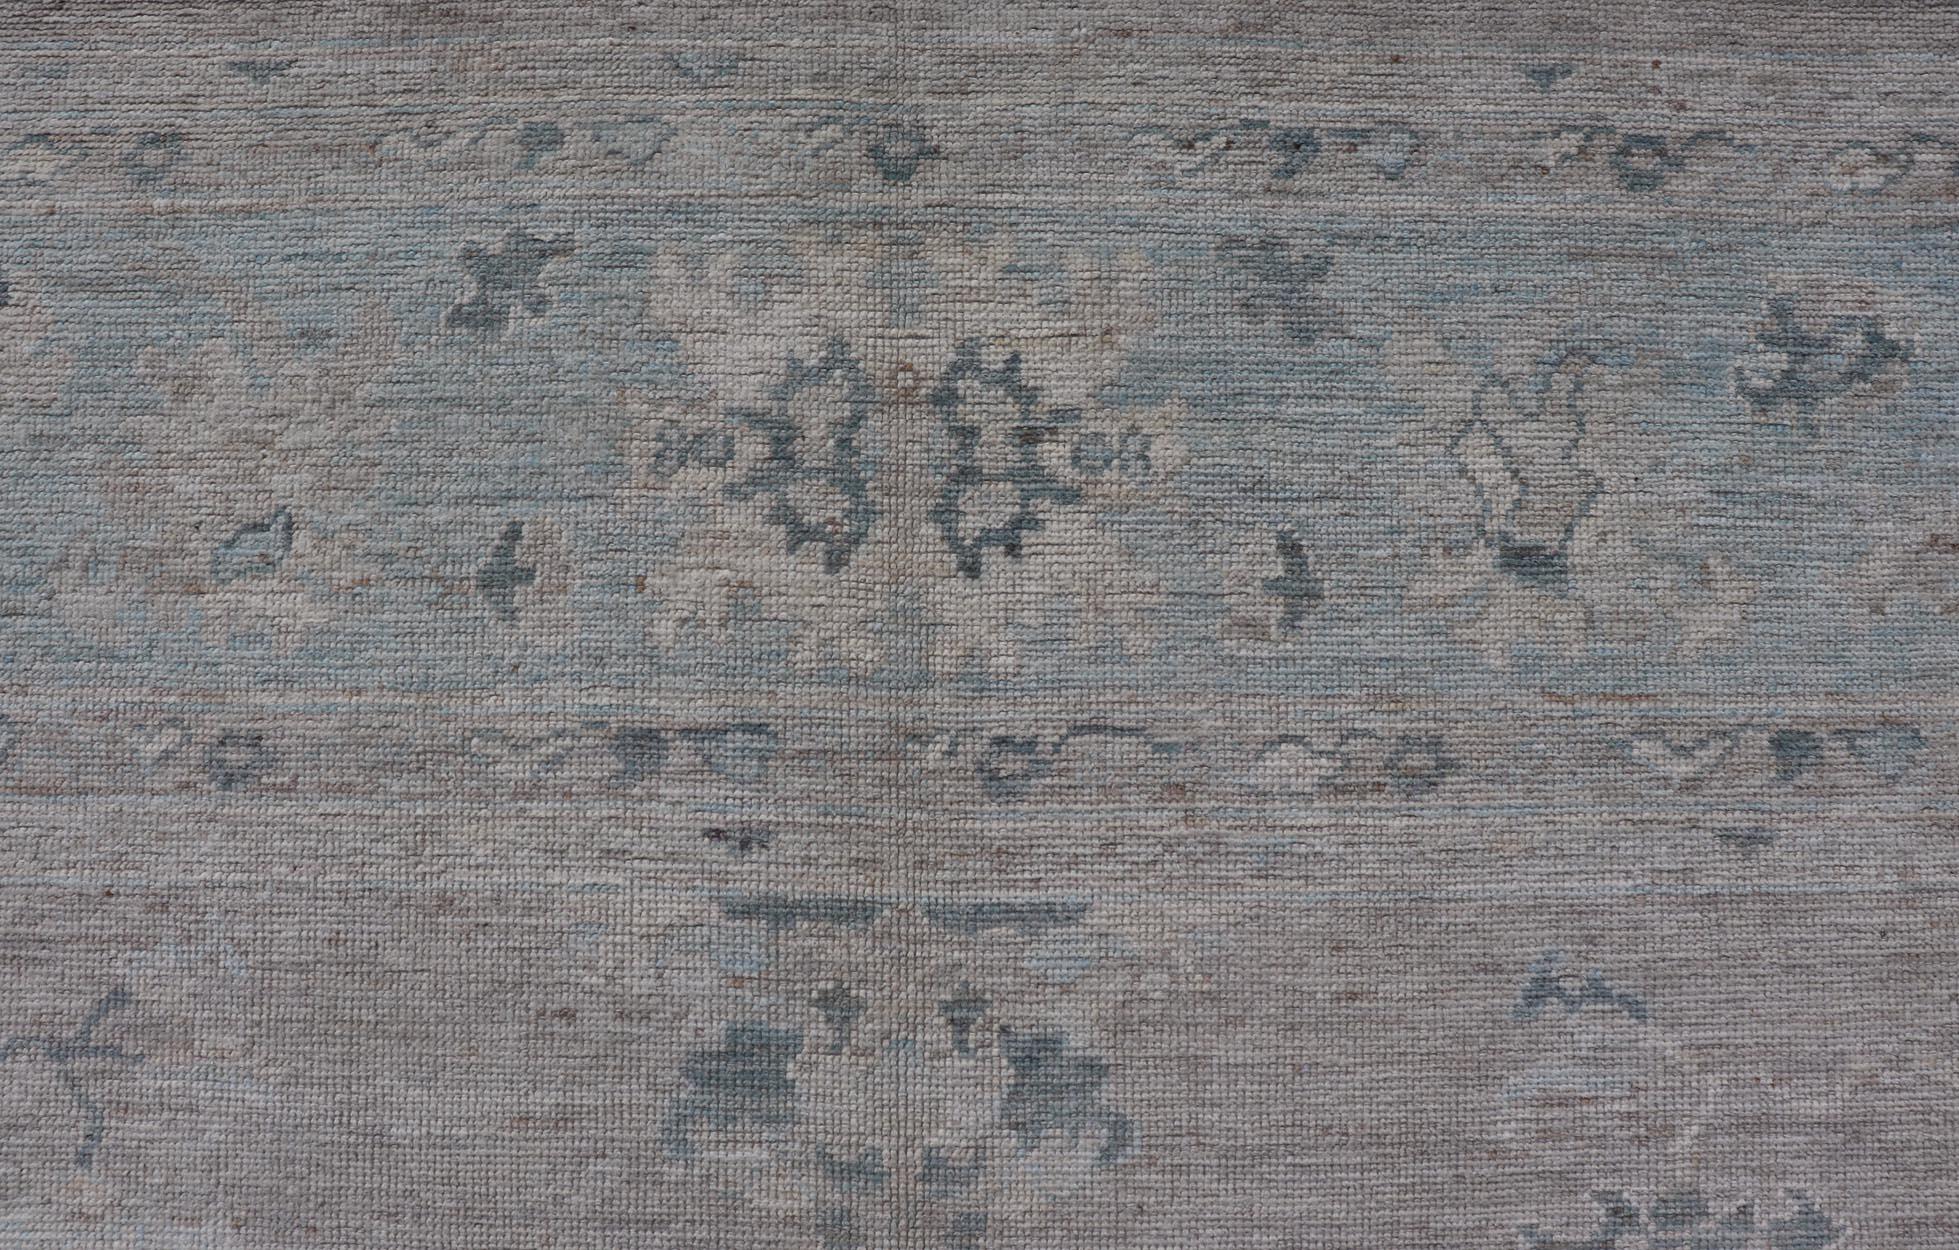 Large Modern Oushak with Floral Motifs in Wheat, Mushroom, Grey & Light Blue 8